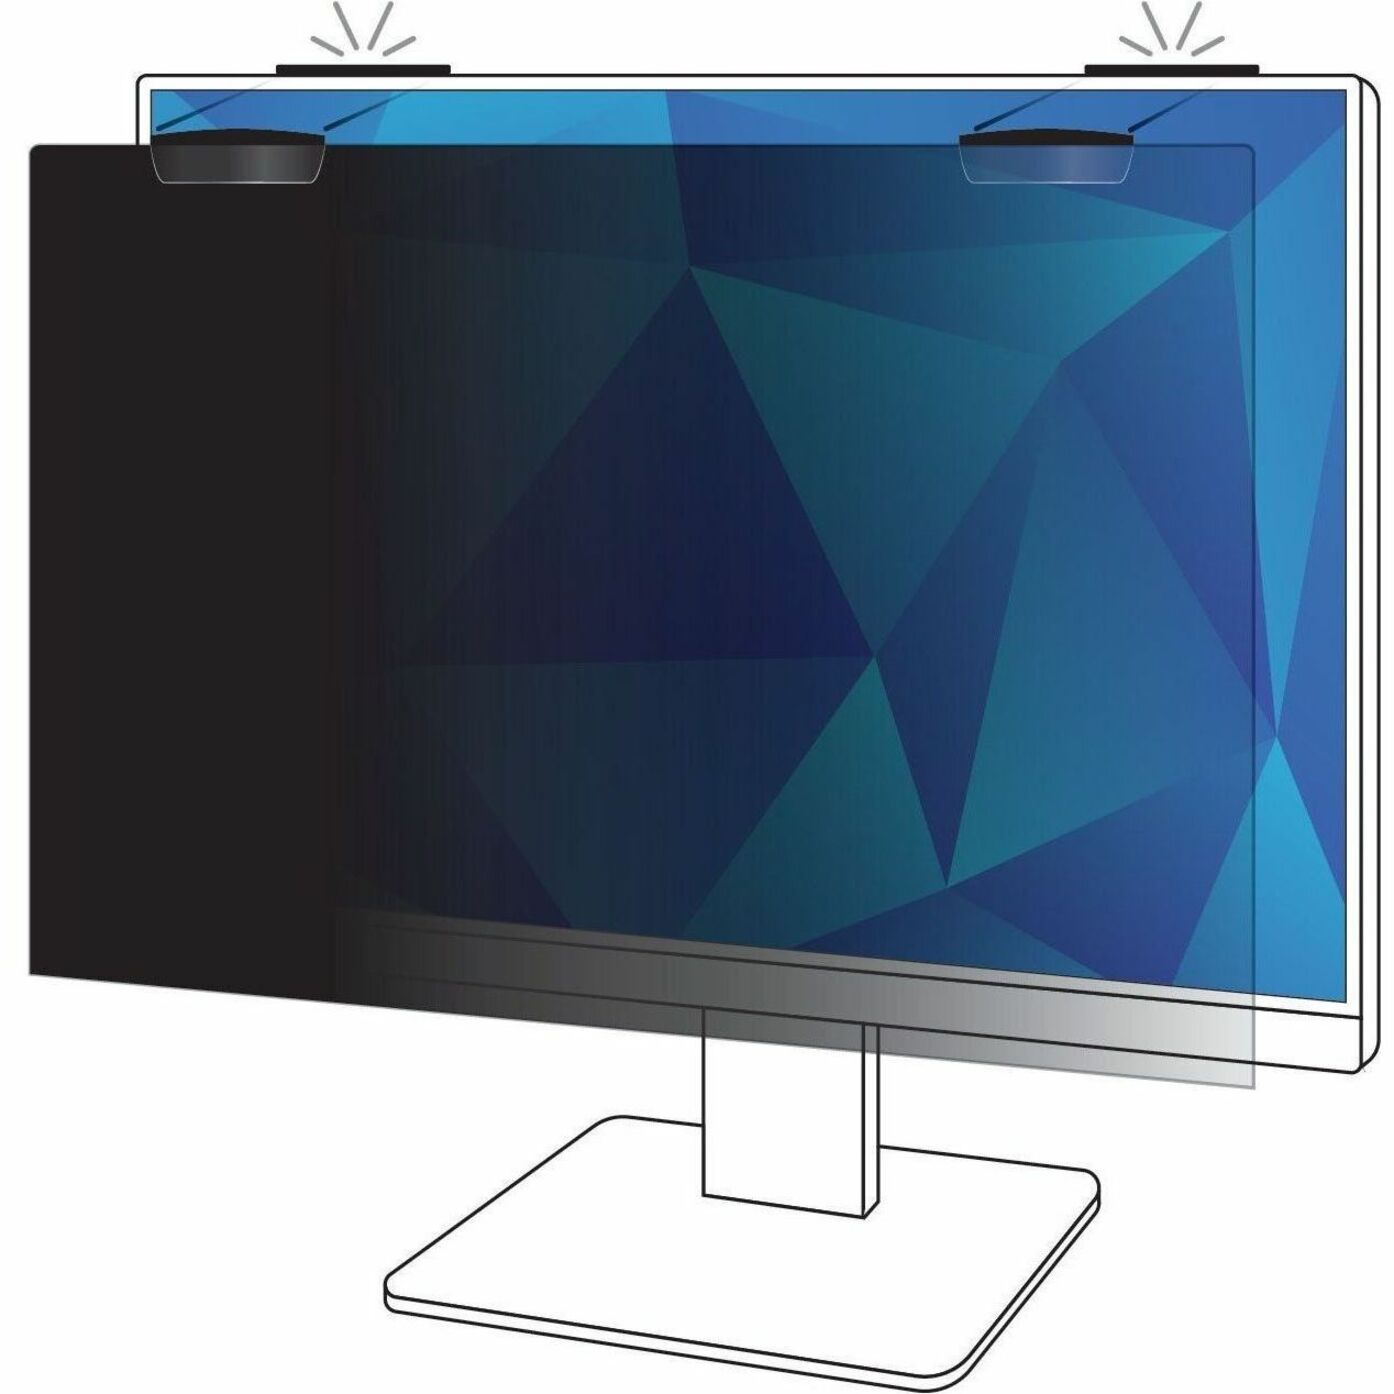 3M PF215W9EM Privacy Screen Filter, 21.5" Widescreen, Blue Light Reduction, Magnetic Attach